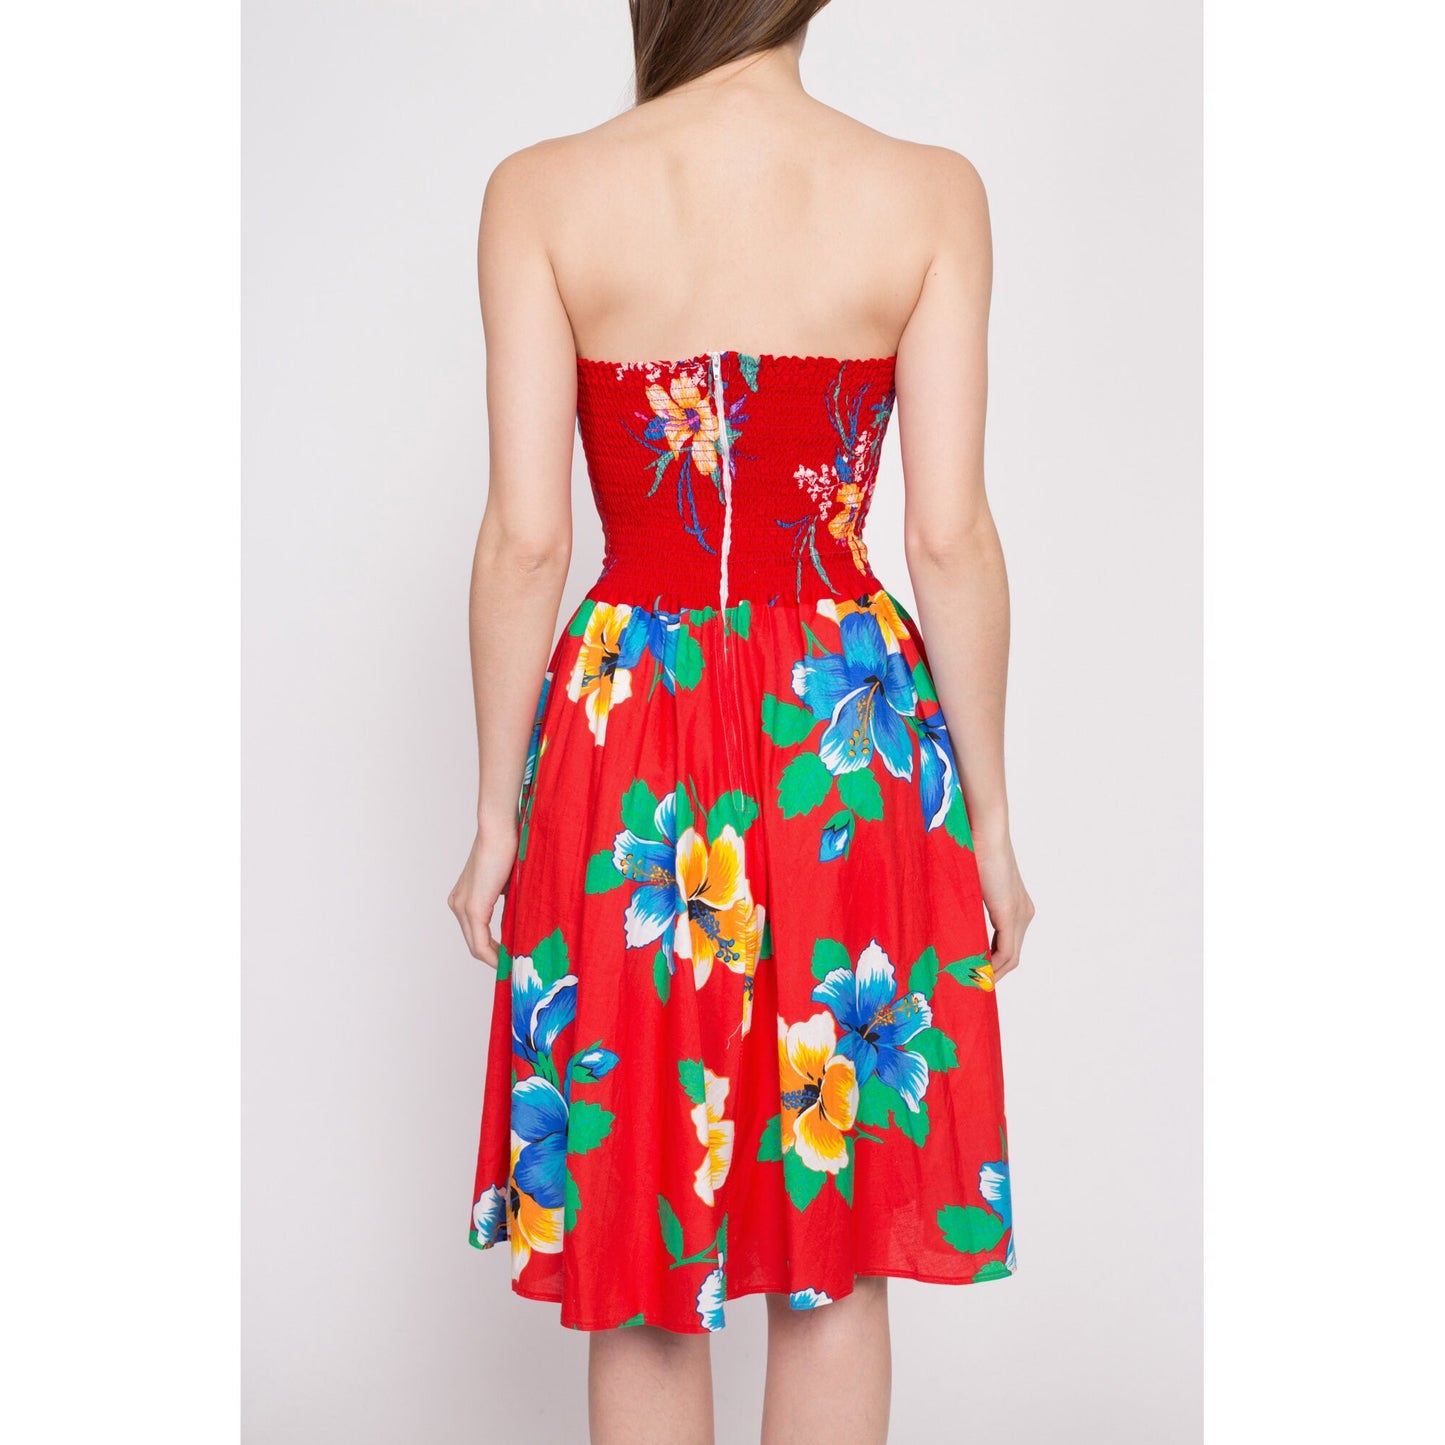 80s Red Floral Strapless Fit & Flare Dress - XS to Small